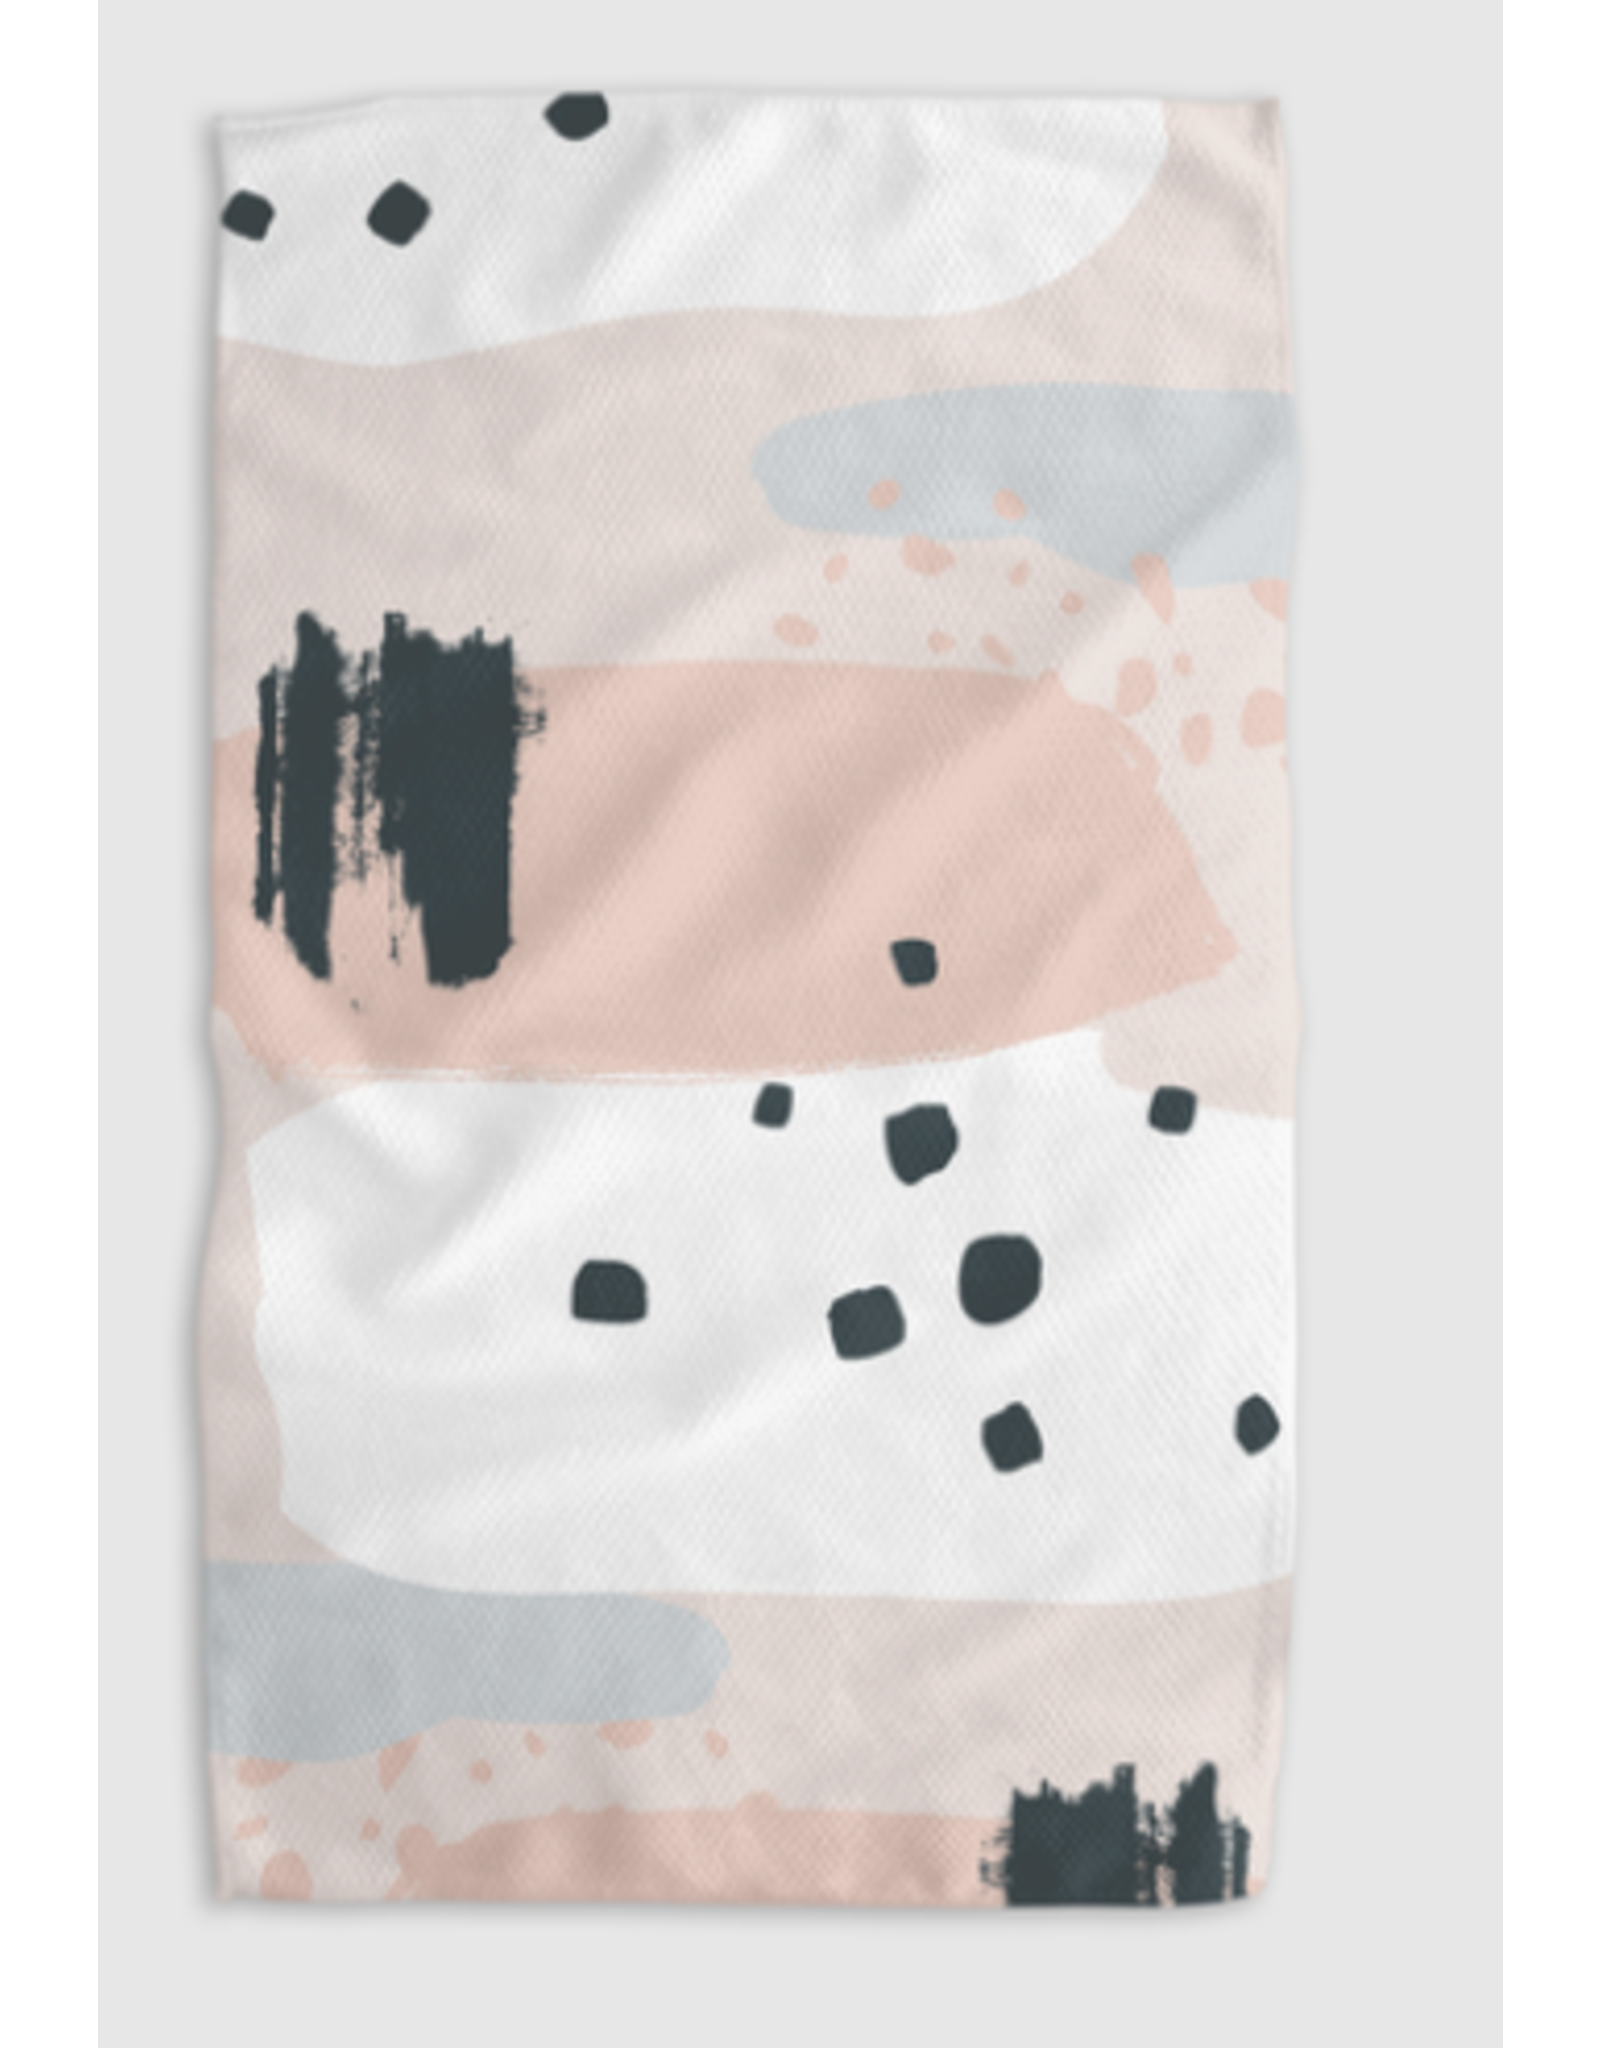 Geometry Tea Towel - Without